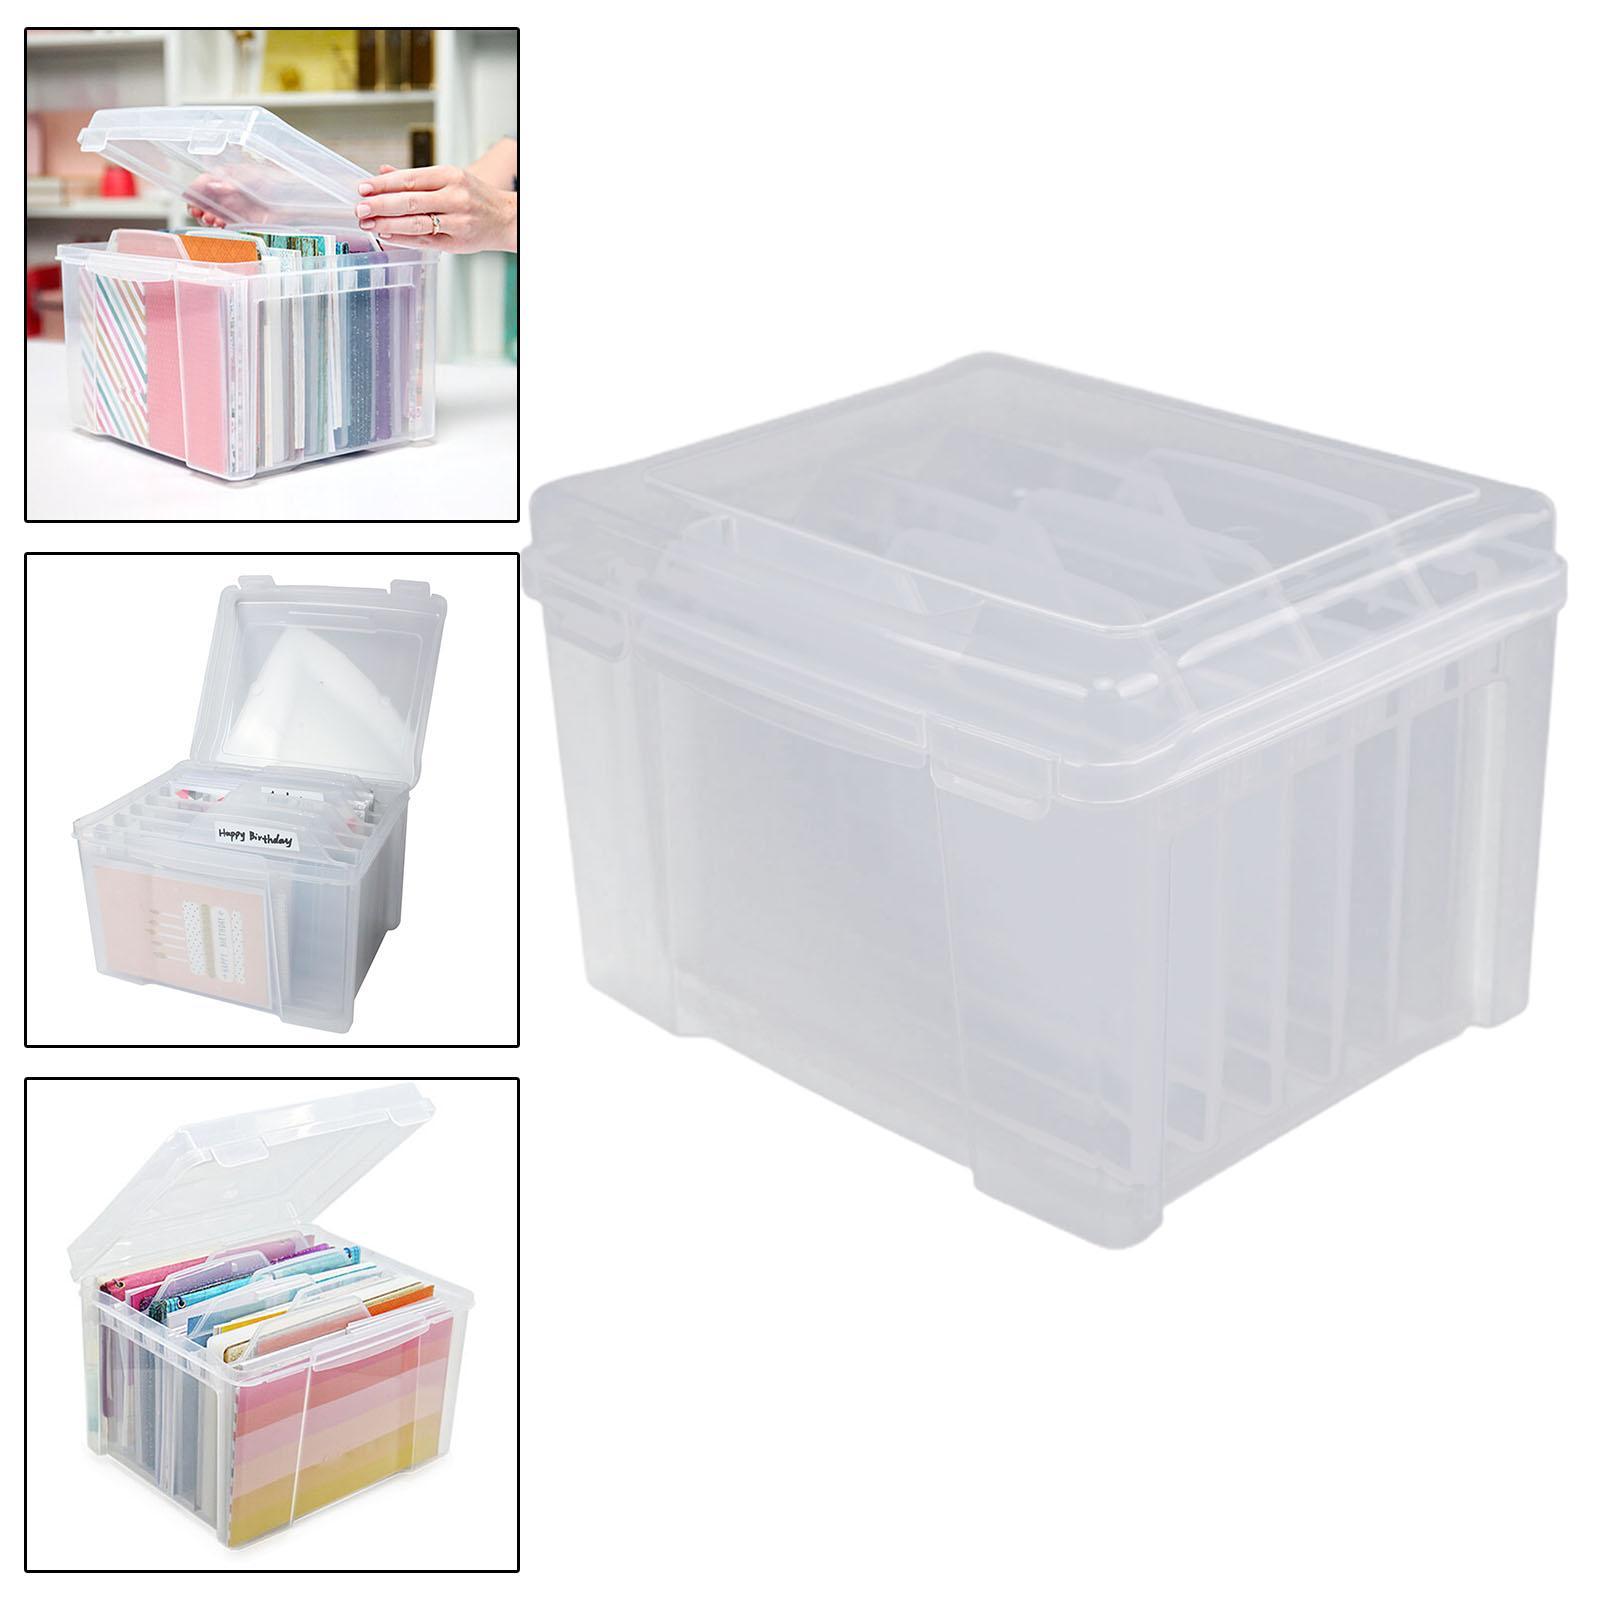 Card Storage Case with 6 Detachable Dividers Multicolor Transparent Organizer Stationery Separation Storage Delicated for Greeting Card Scrapbook